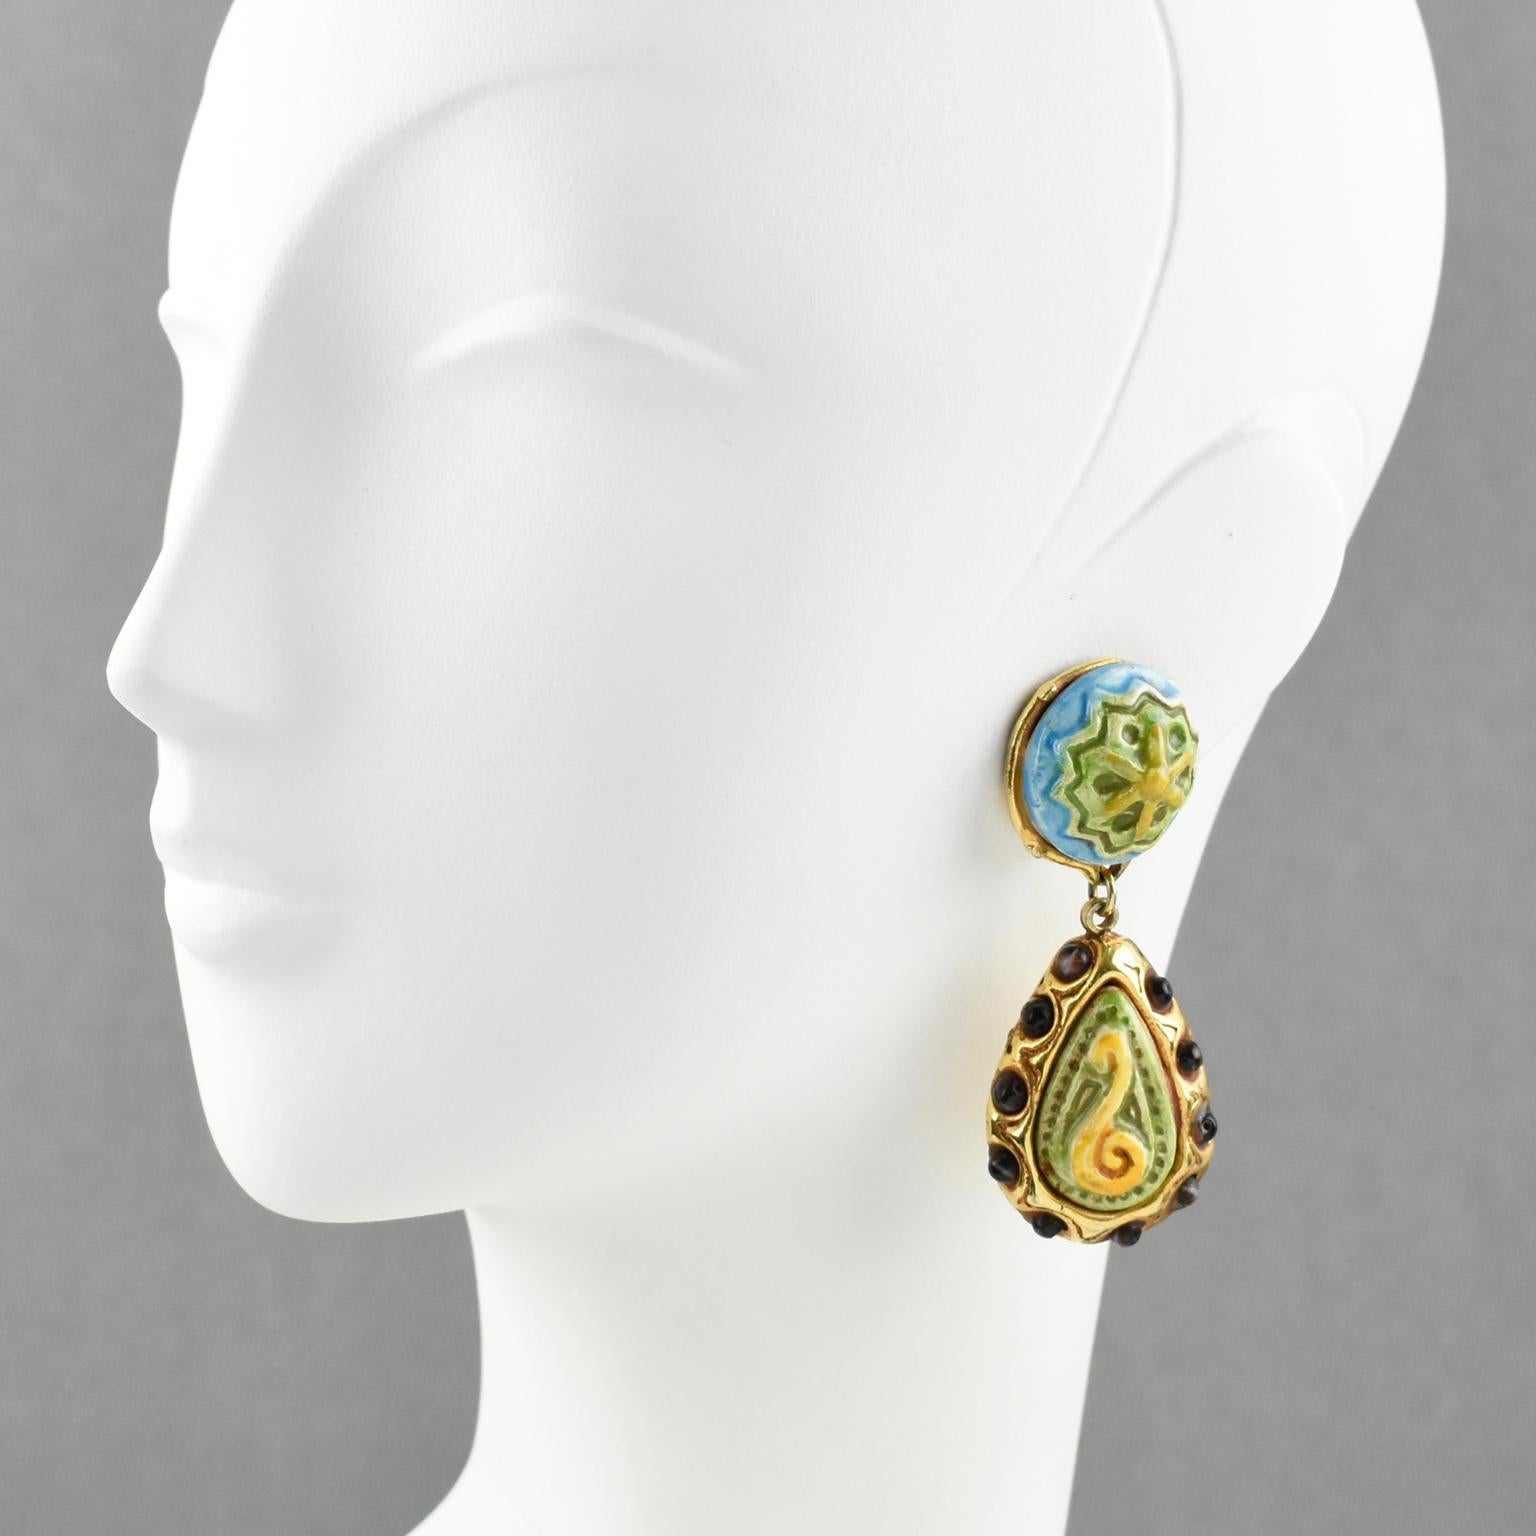 Elegant Kalinger Paris clip-on earrings. Oversized dangling shape featuring gilt resin drop with textured pattern ornate with burgundy glass beads and topped with carved ceramic elements. Ceramic cabochons have assorted colors of apple green, blue